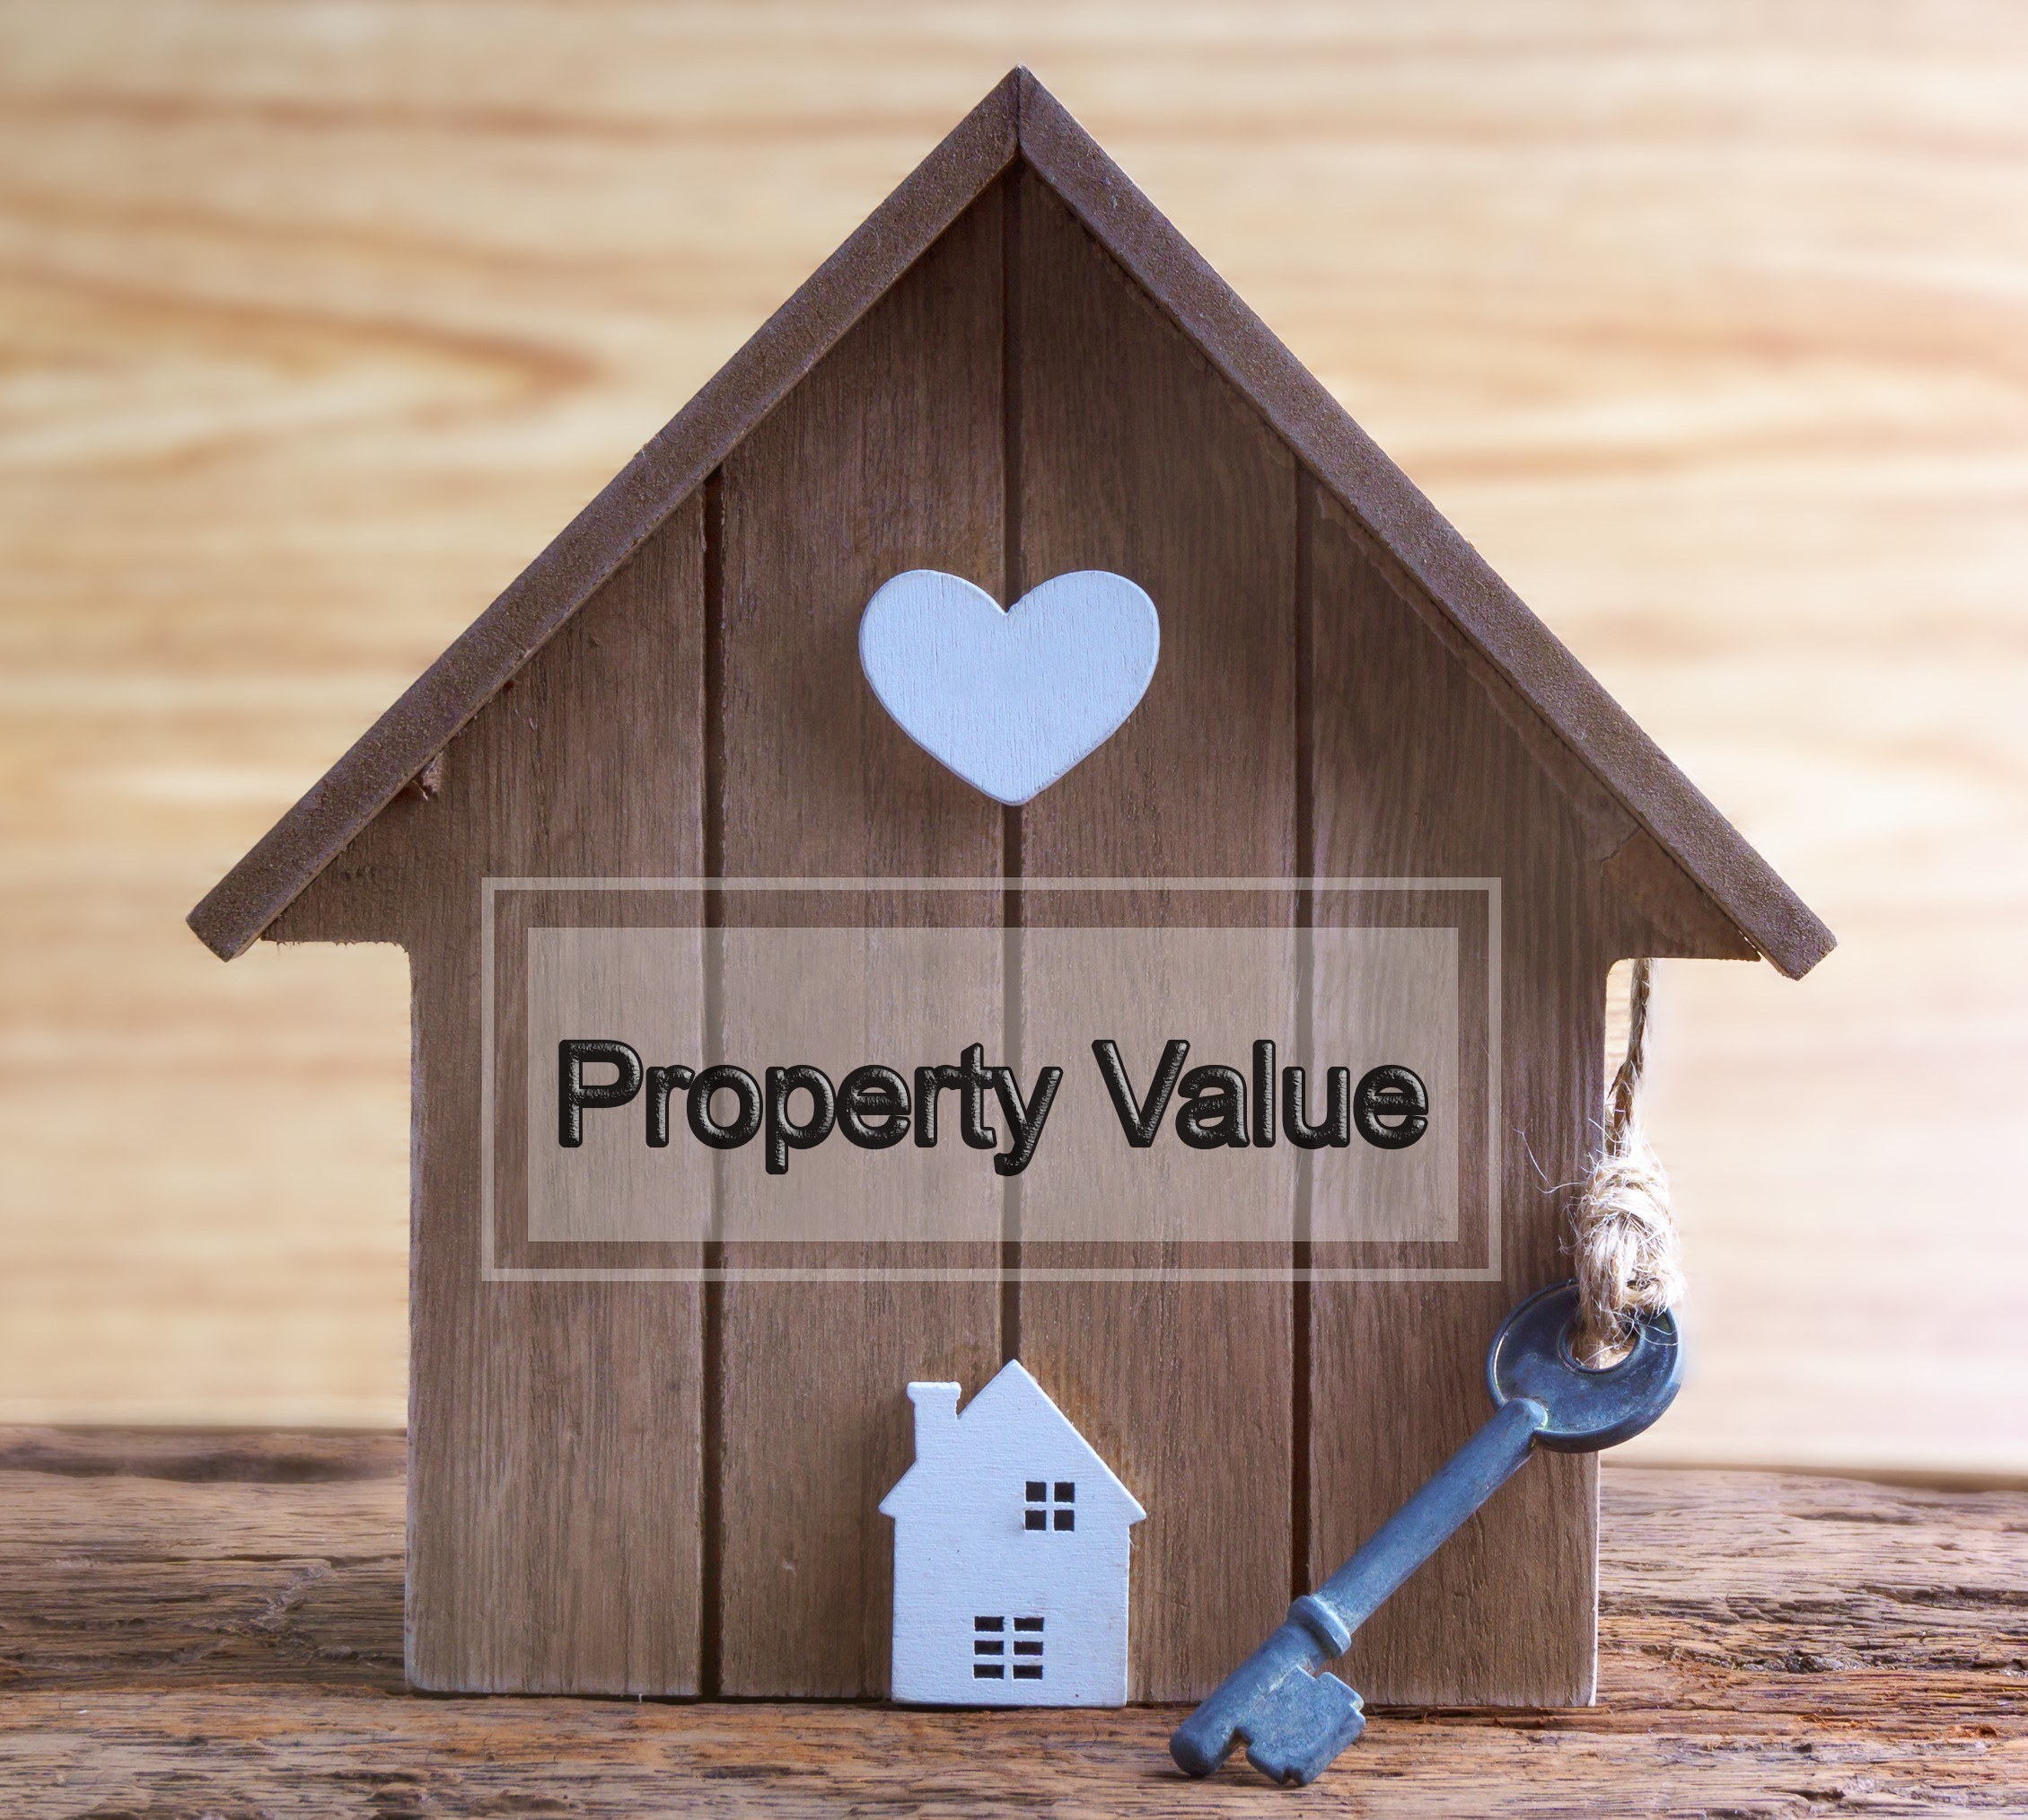 How to Add Value to Your Home